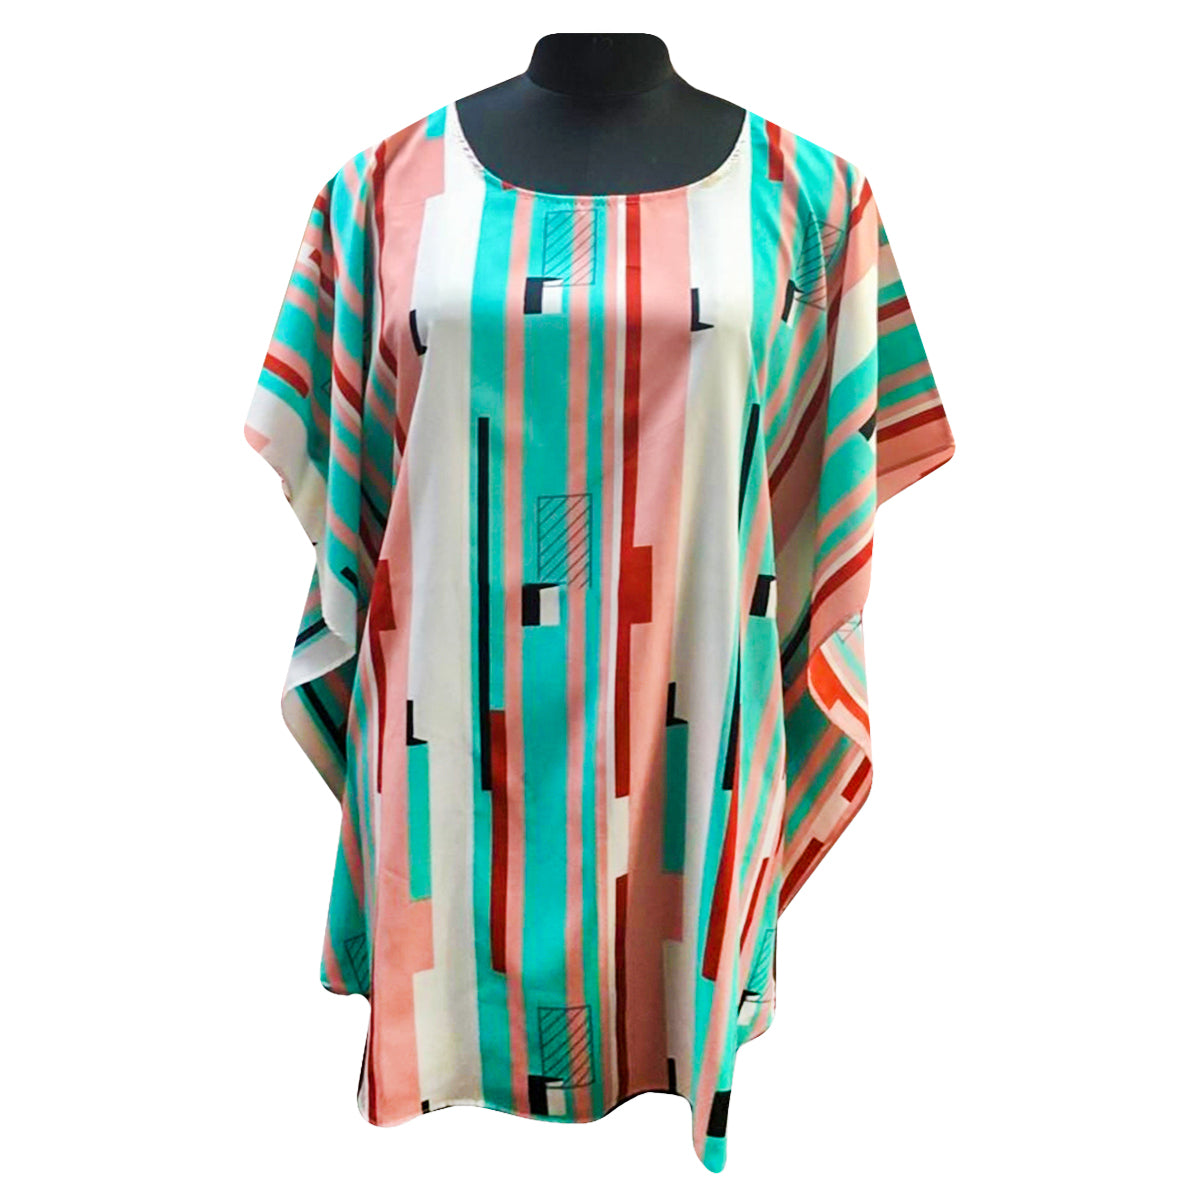 Colorful Abstract Poncho Mini Dress